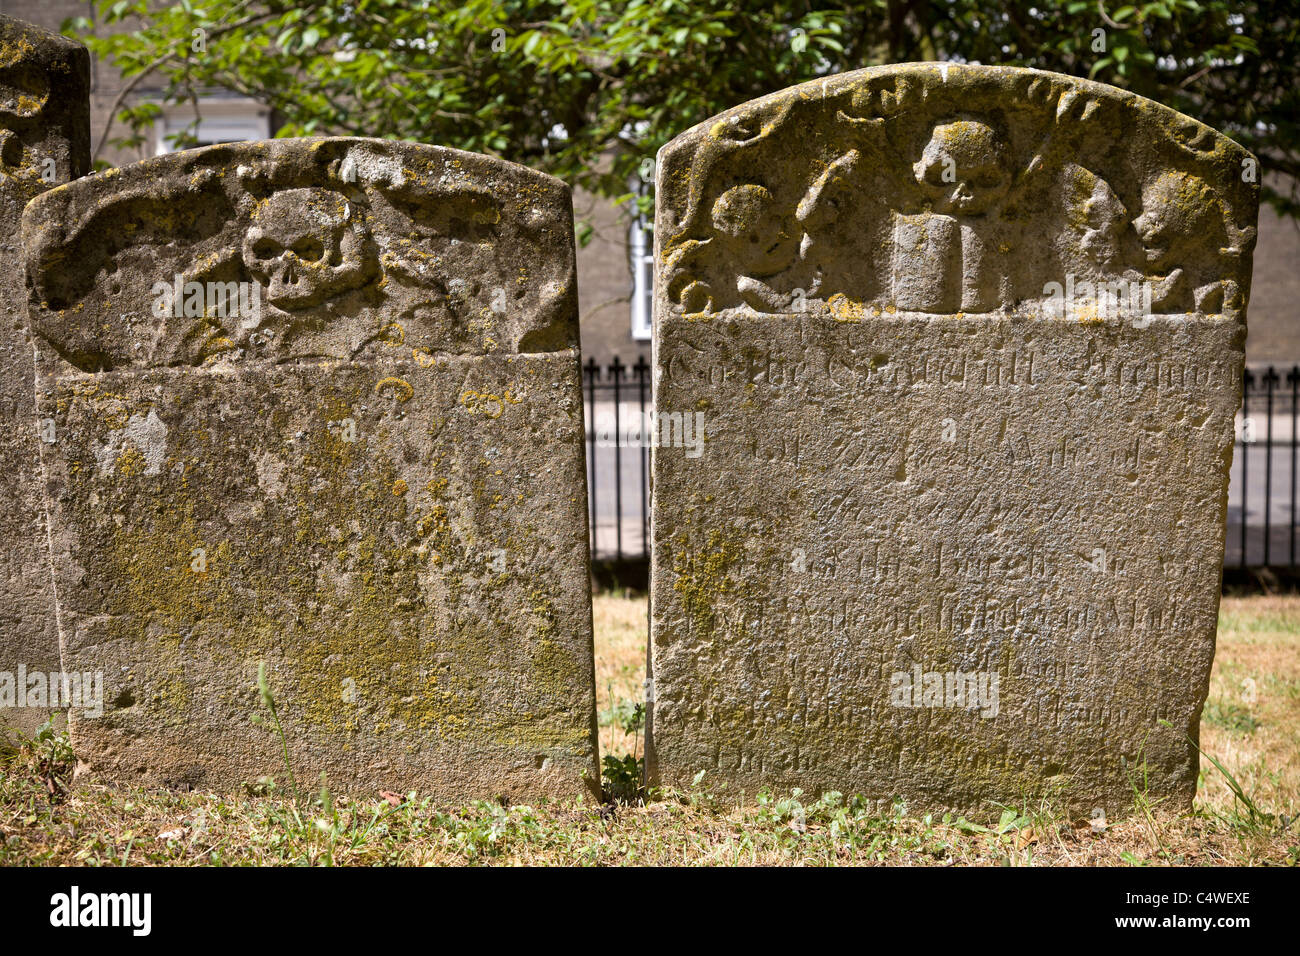 Headstone symbolism, depicting death or mortality. Stock Photo